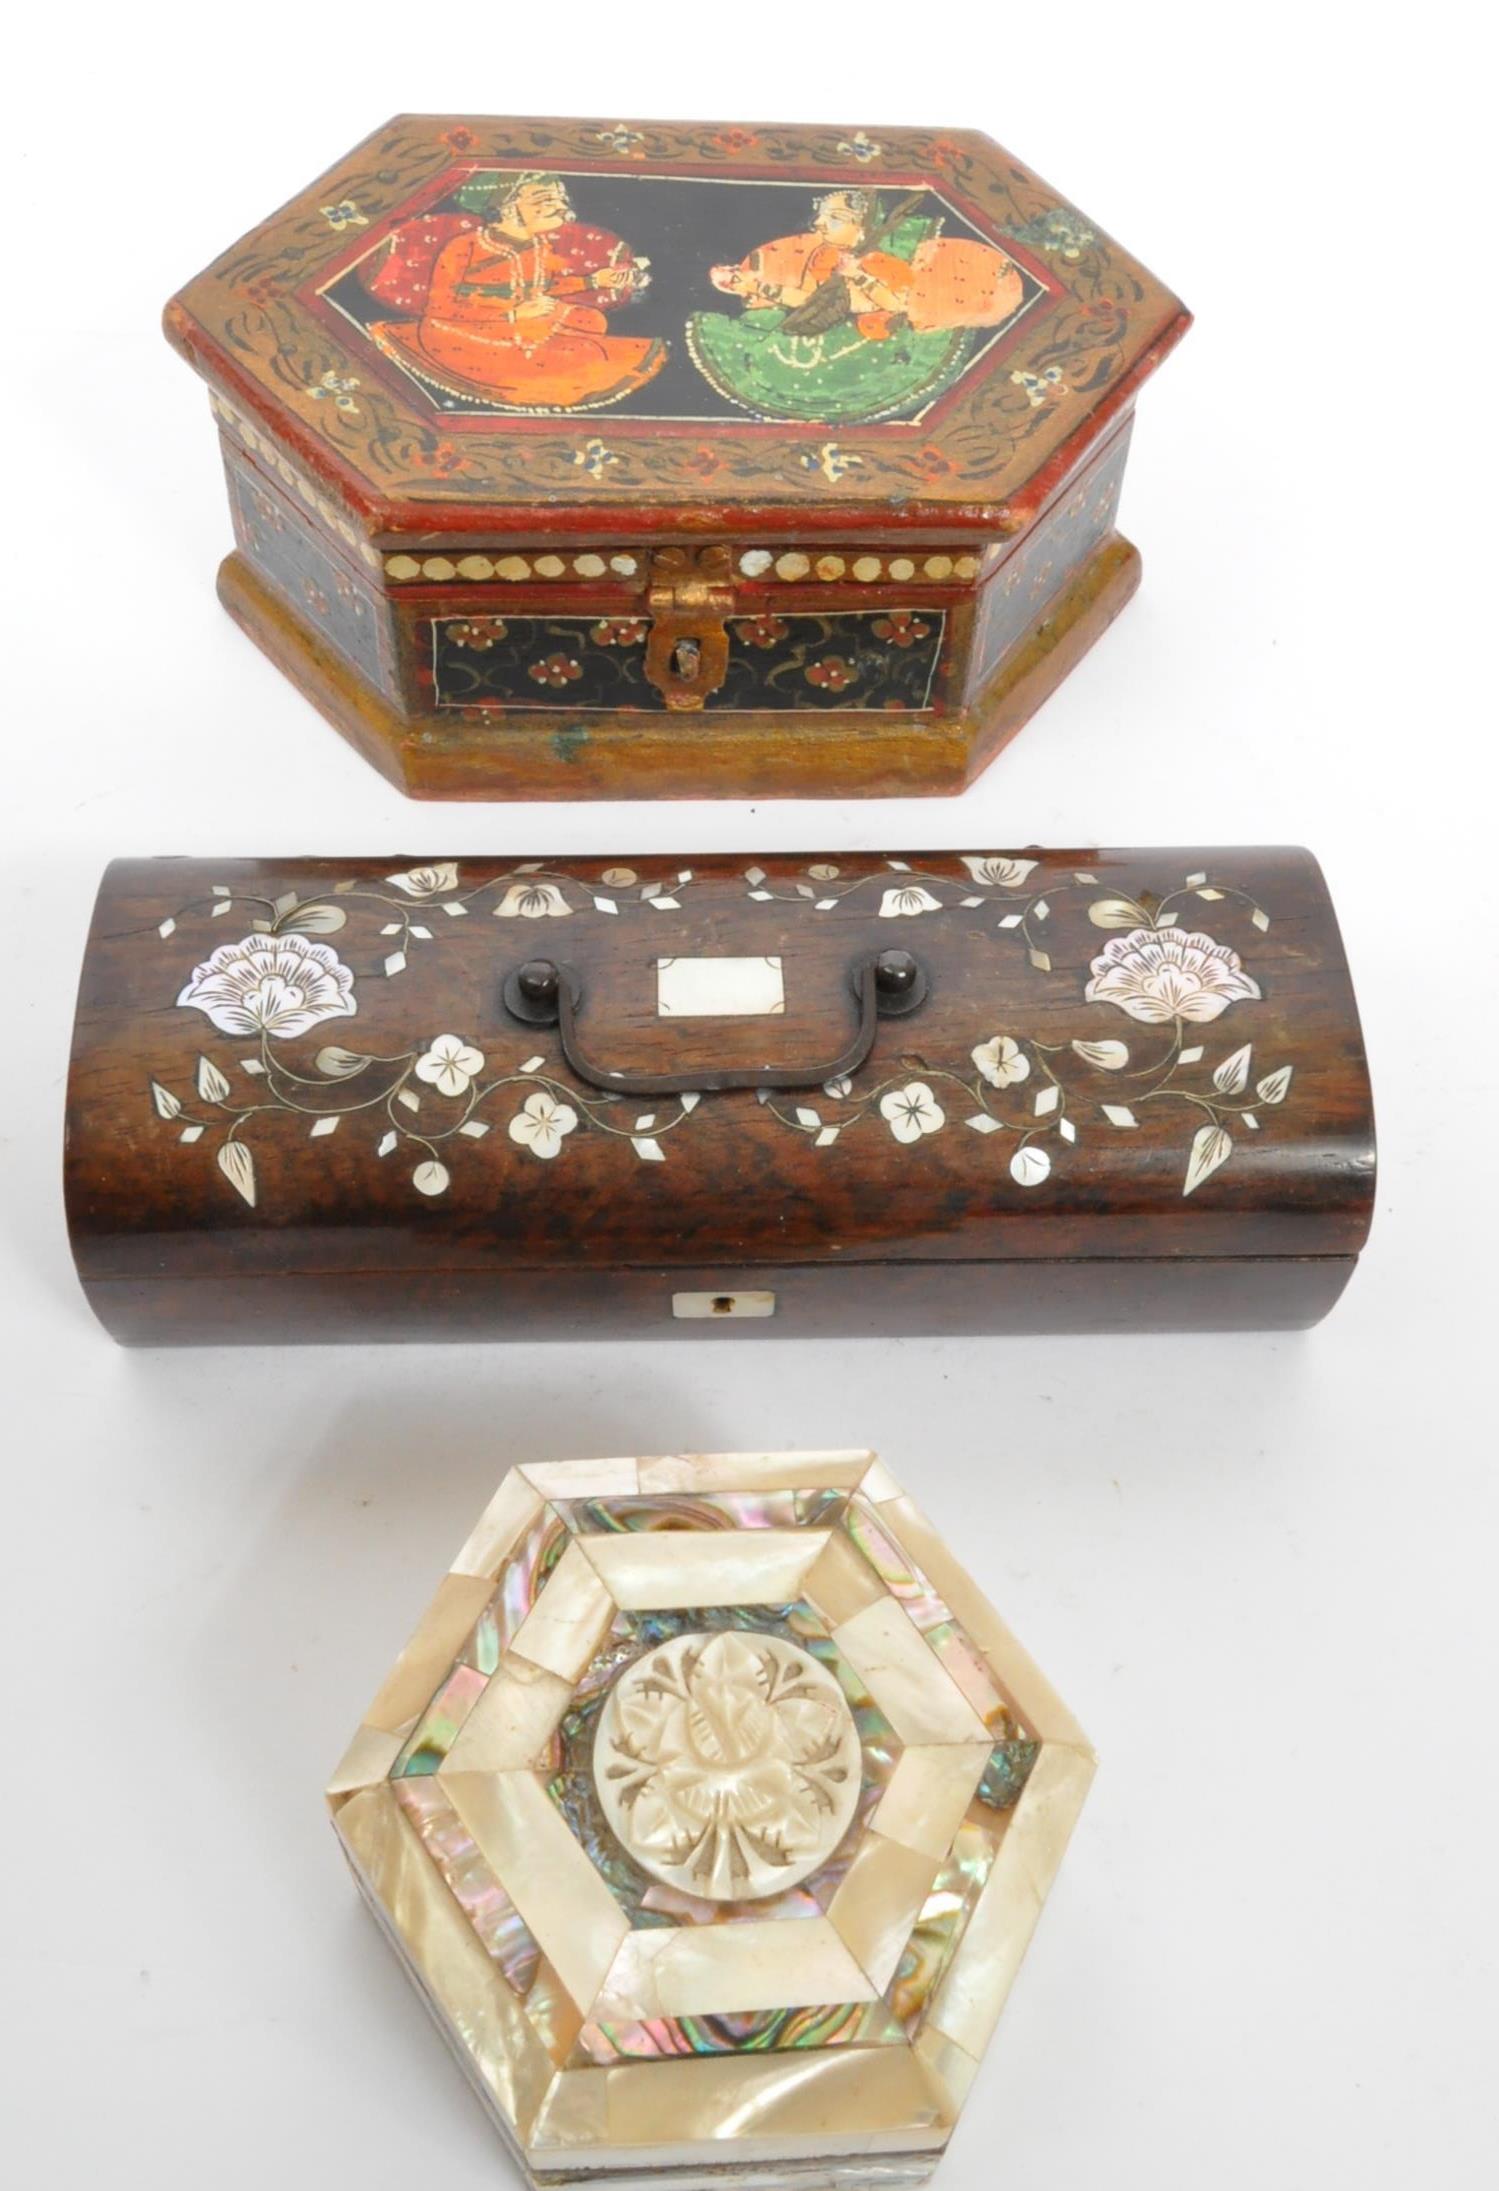 THREE EARLY 20TH CENTURY BOXES - MOTHER OF PEARL - INDIAN